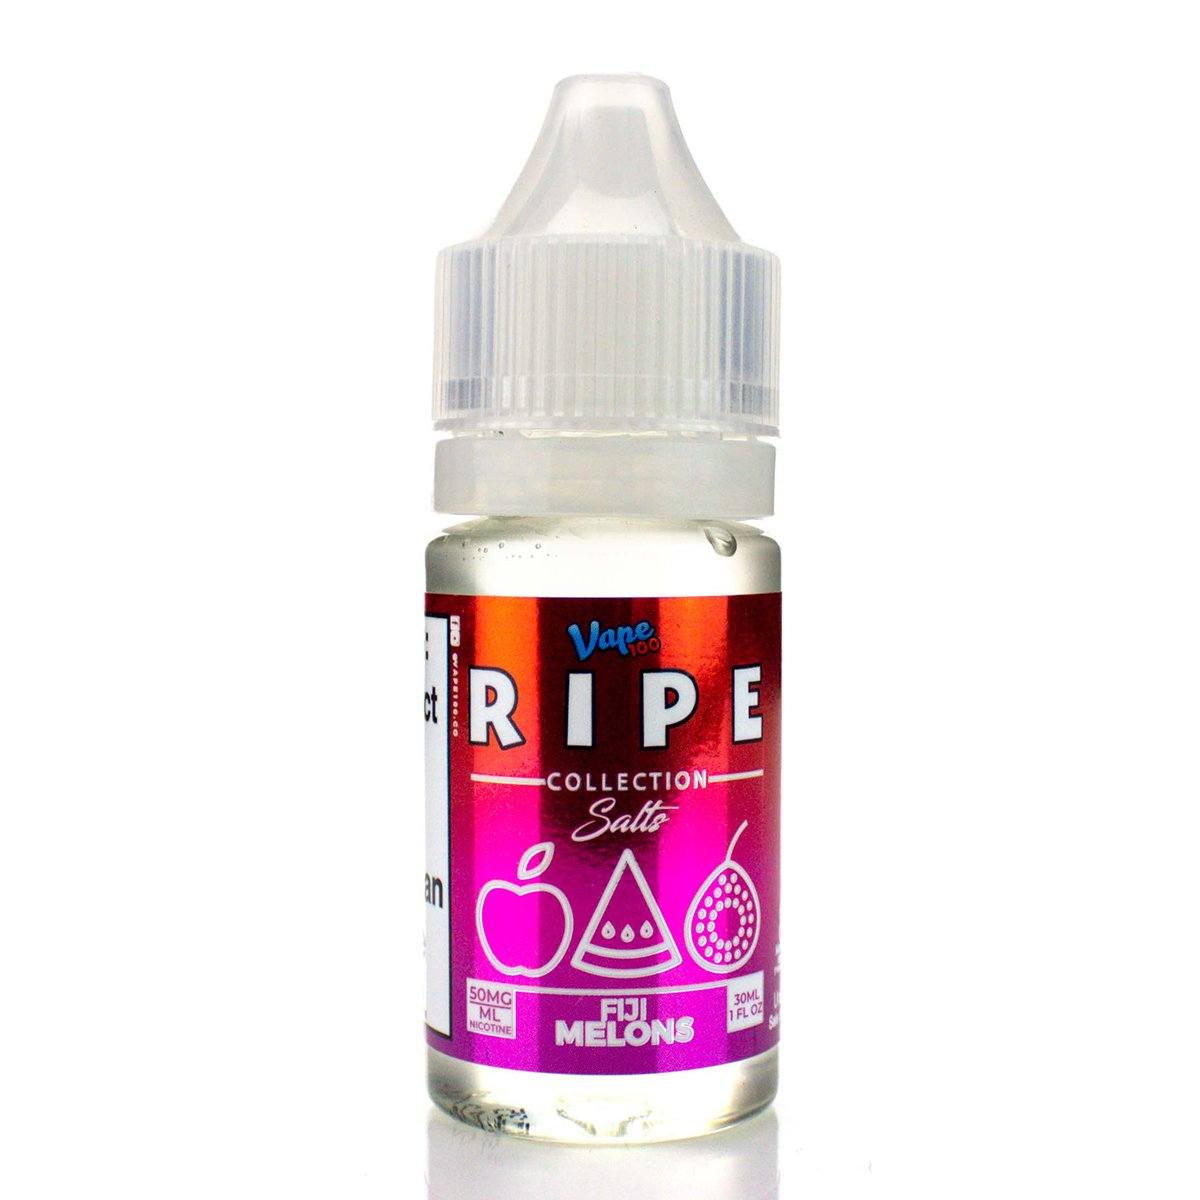 Fiji Melons by Ripe Collection Salts 30ml Best Sales Price - eJuice